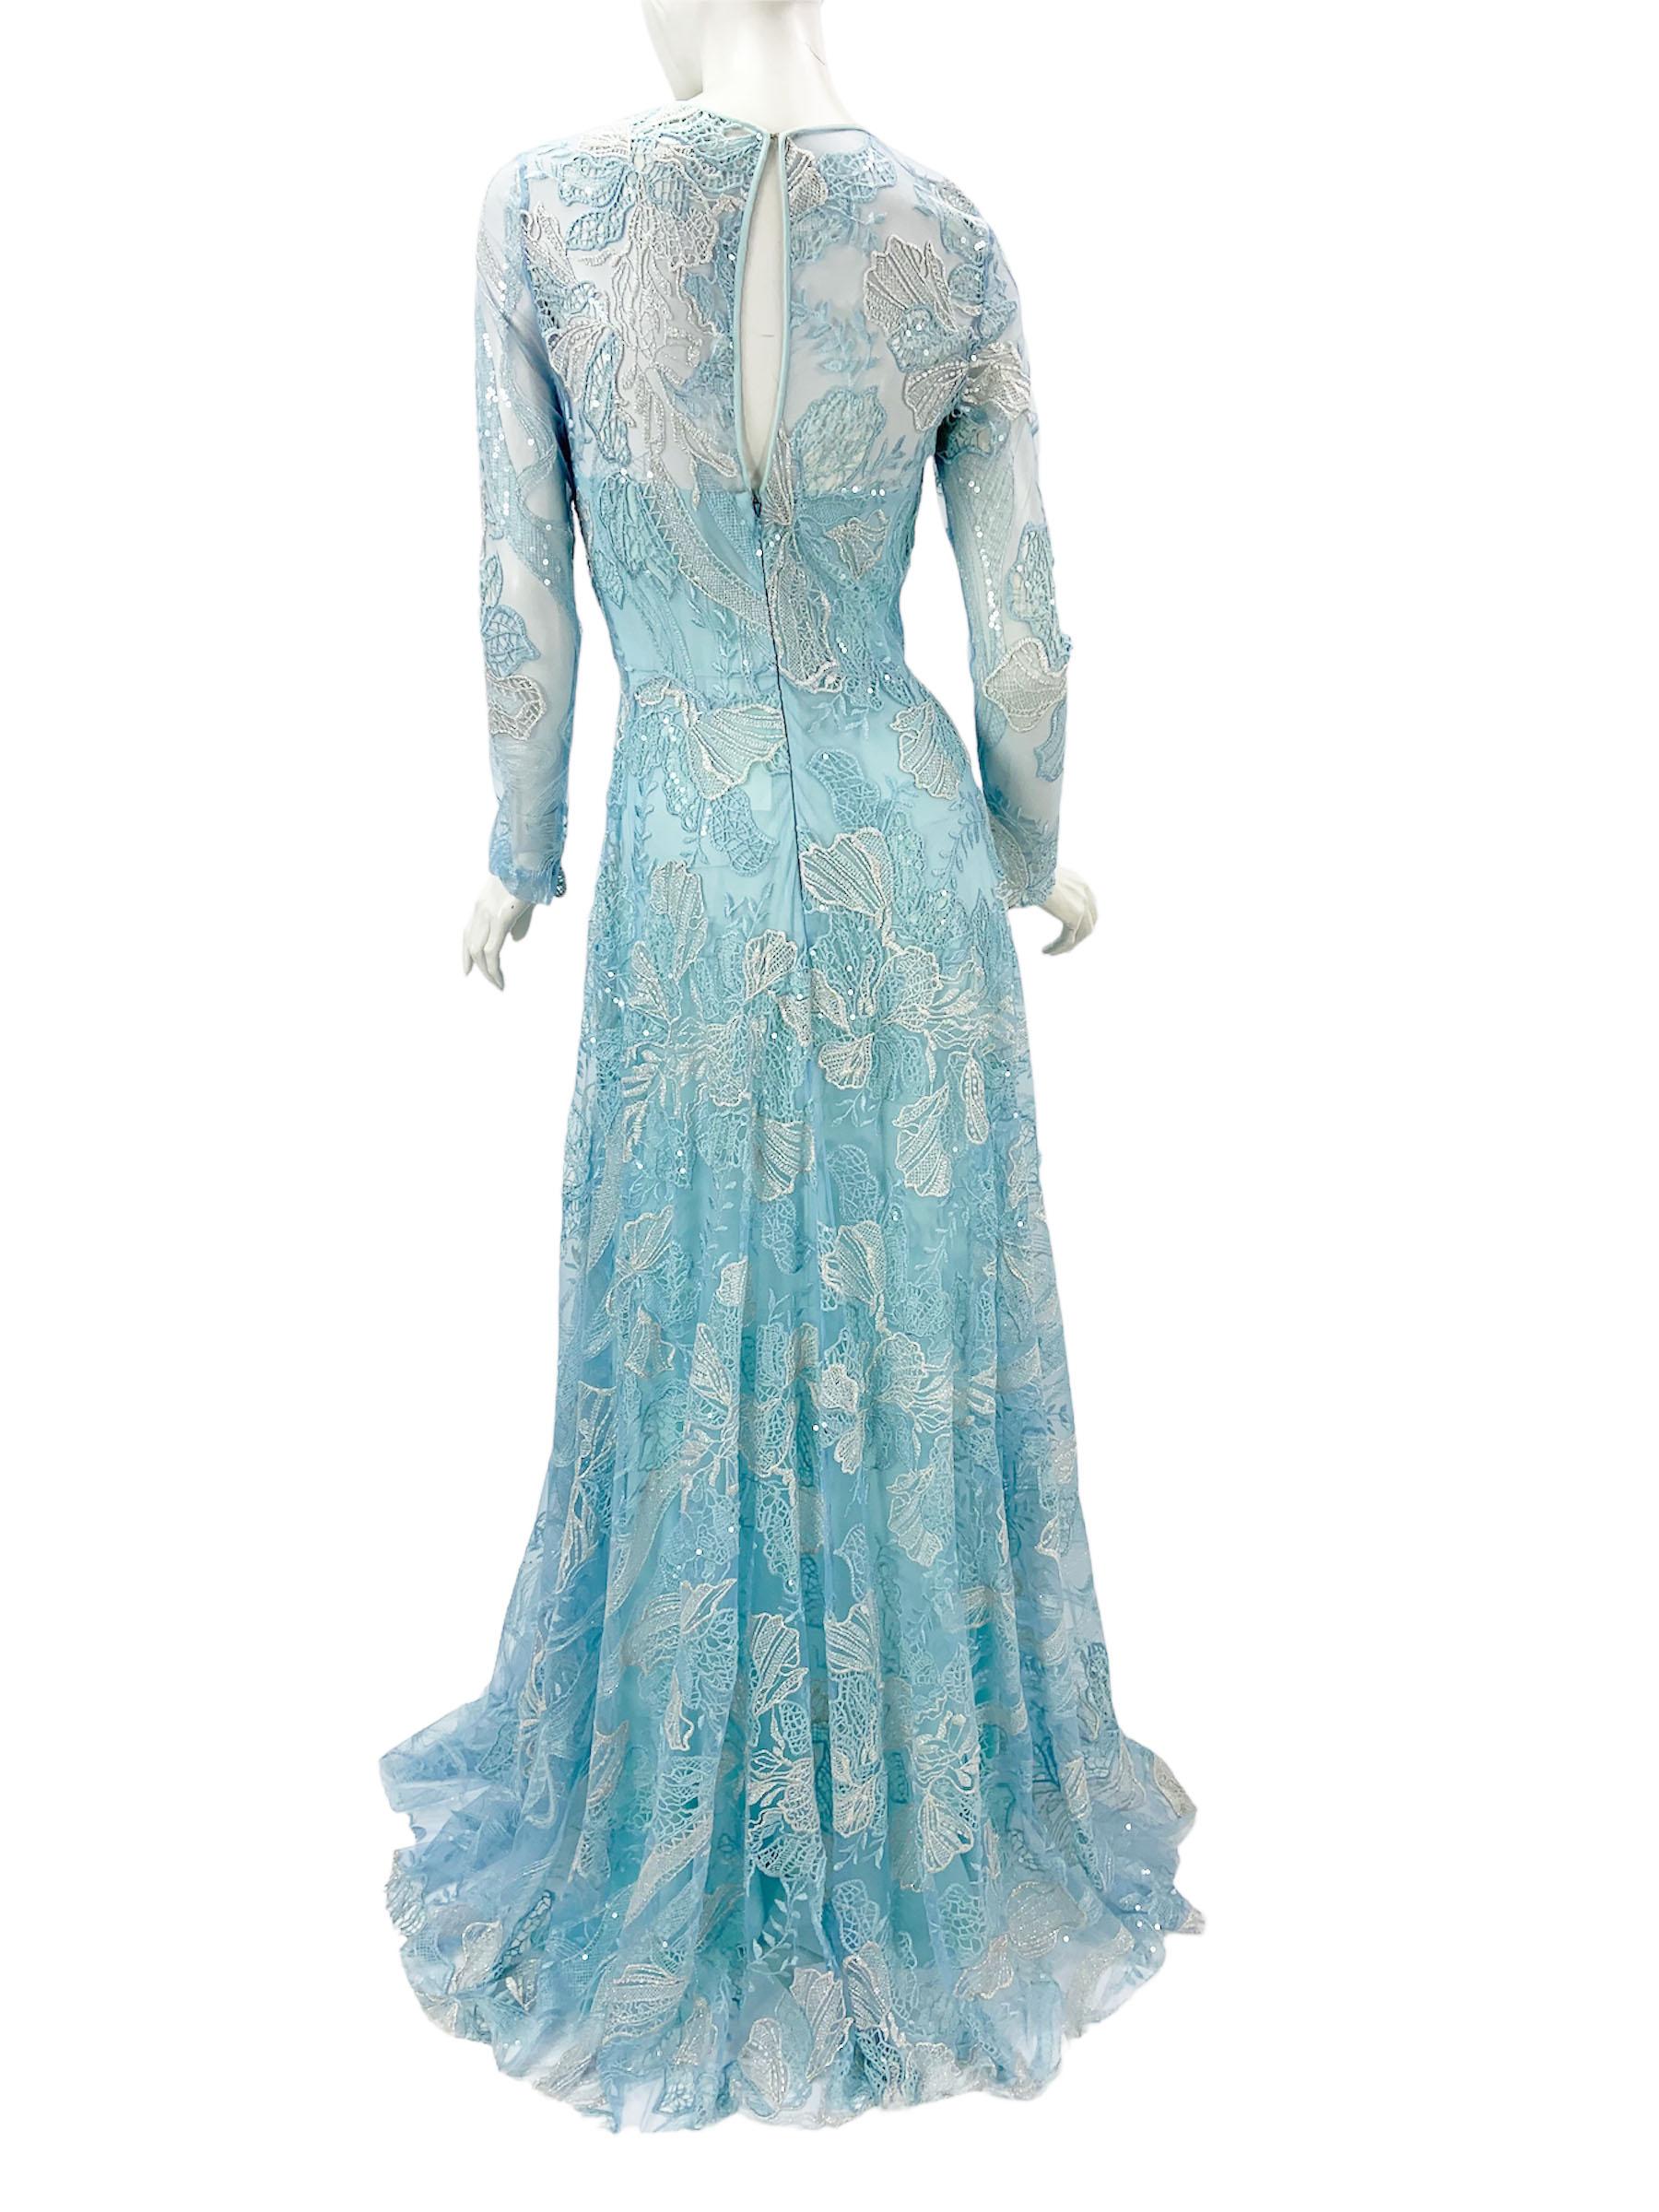 NWT Naeem Khan Blue Lace Embellished Tulle Maxi Dress Gown US 4 In New Condition For Sale In Montgomery, TX